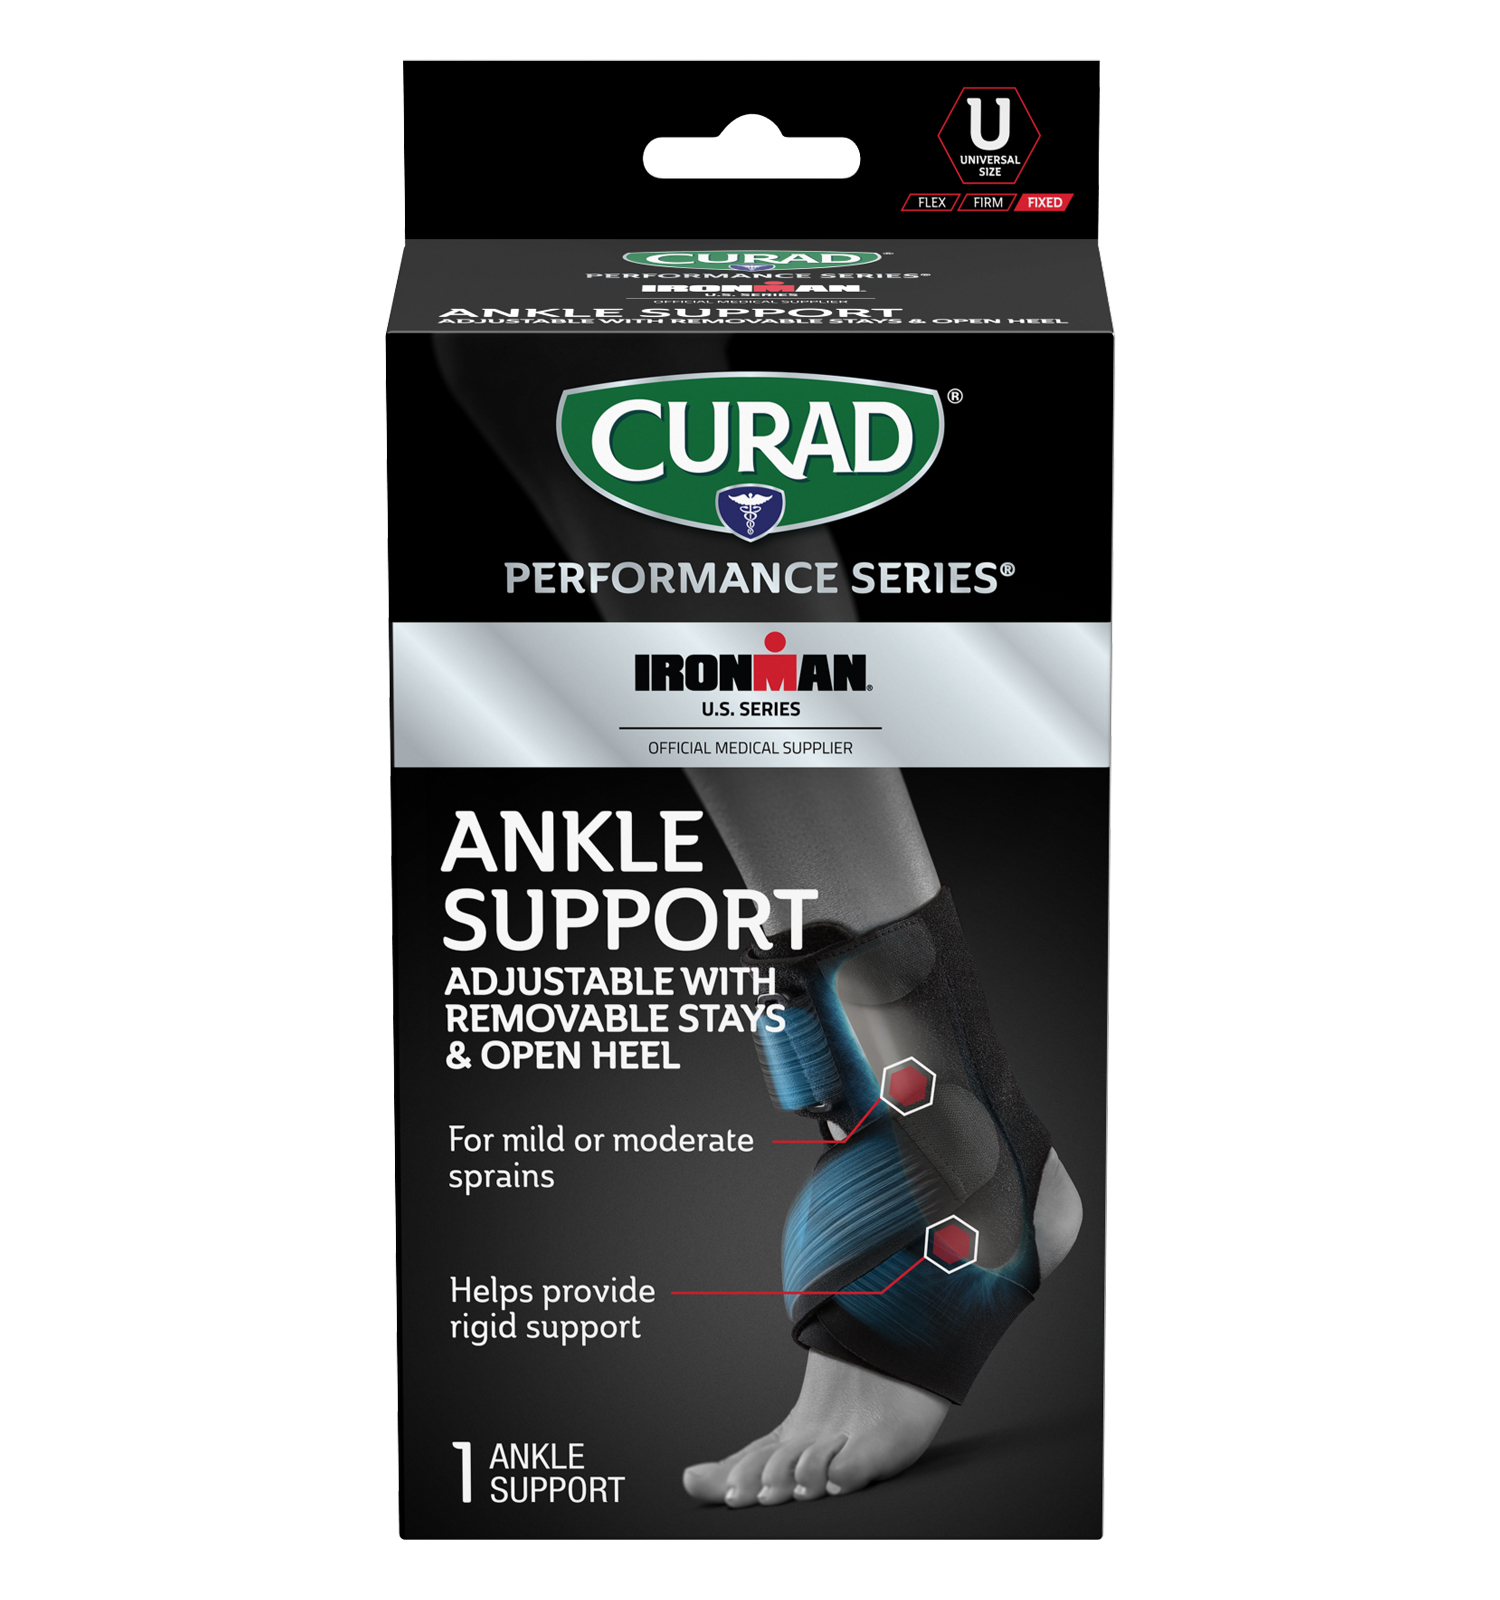 CURAD Performance Series IRONMAN Ankle Support, Elastic, Small